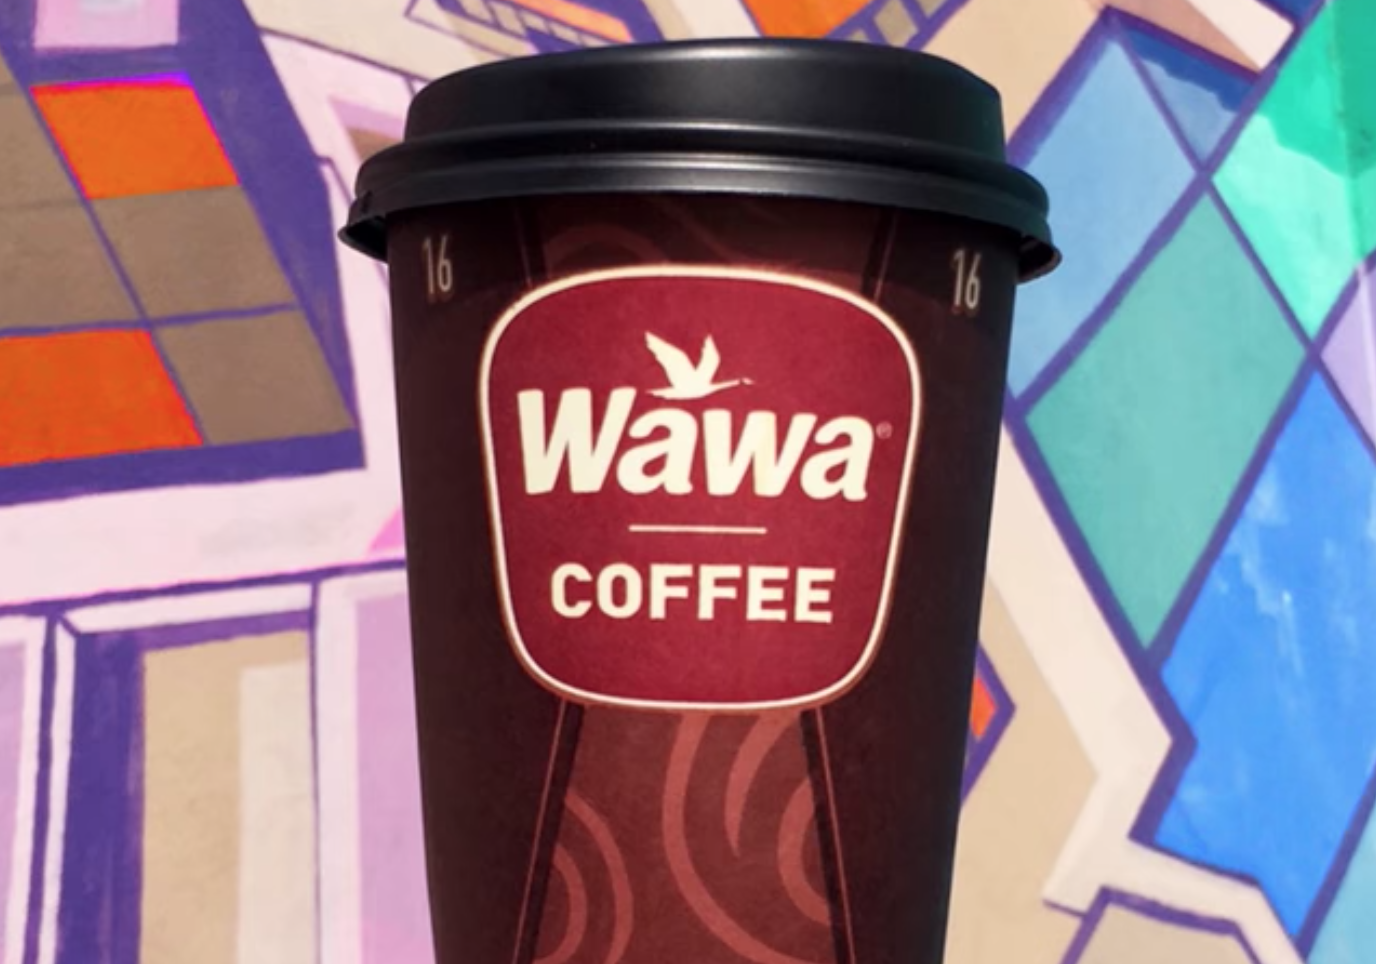 Wawa Day Is Here To Bring You FREE Coffee Of Any Size